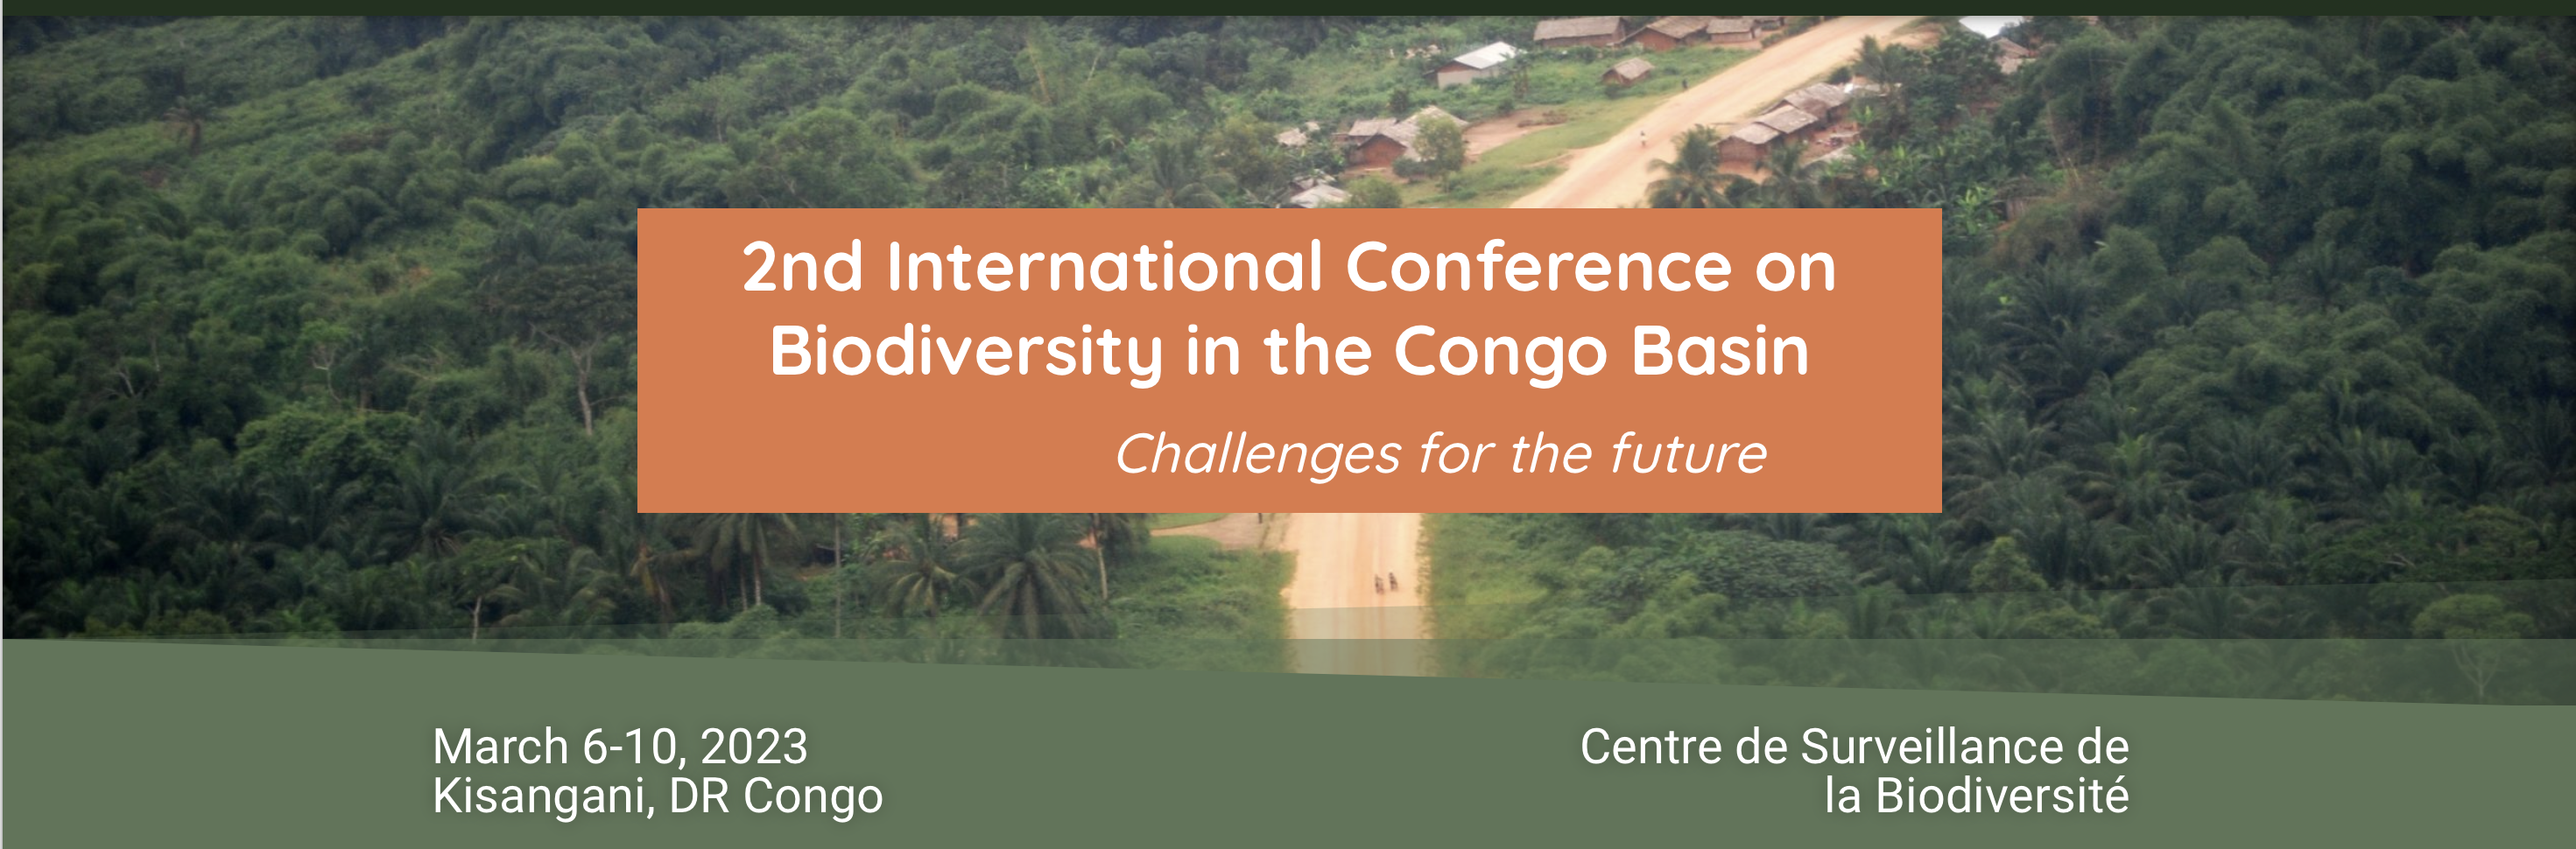 2nd International Conference on Biodiversity in the Congo Basin